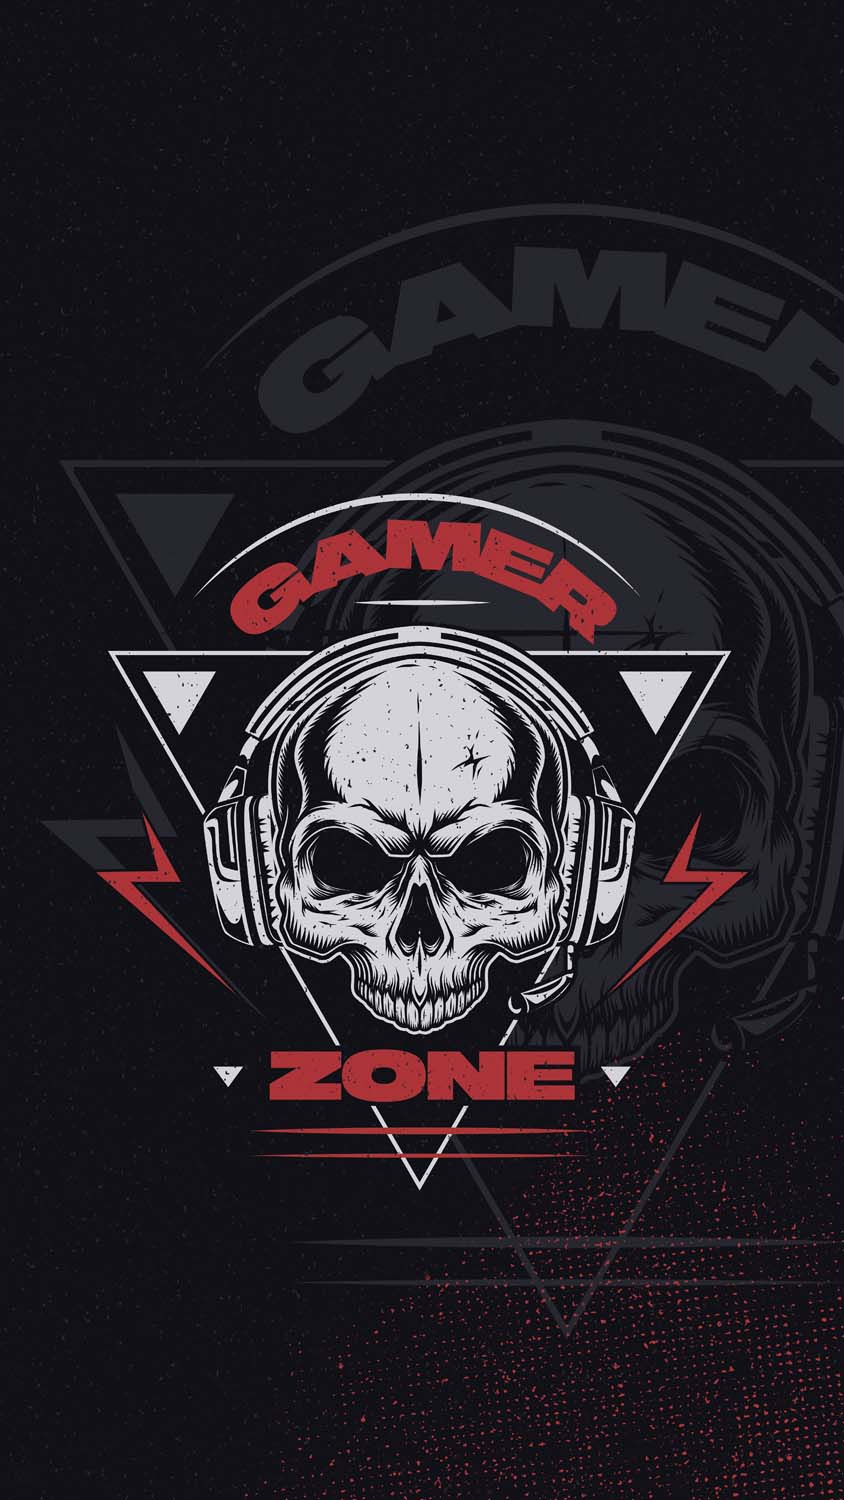 Gamer Zone IPhone Wallpaper HD  IPhone Wallpapers